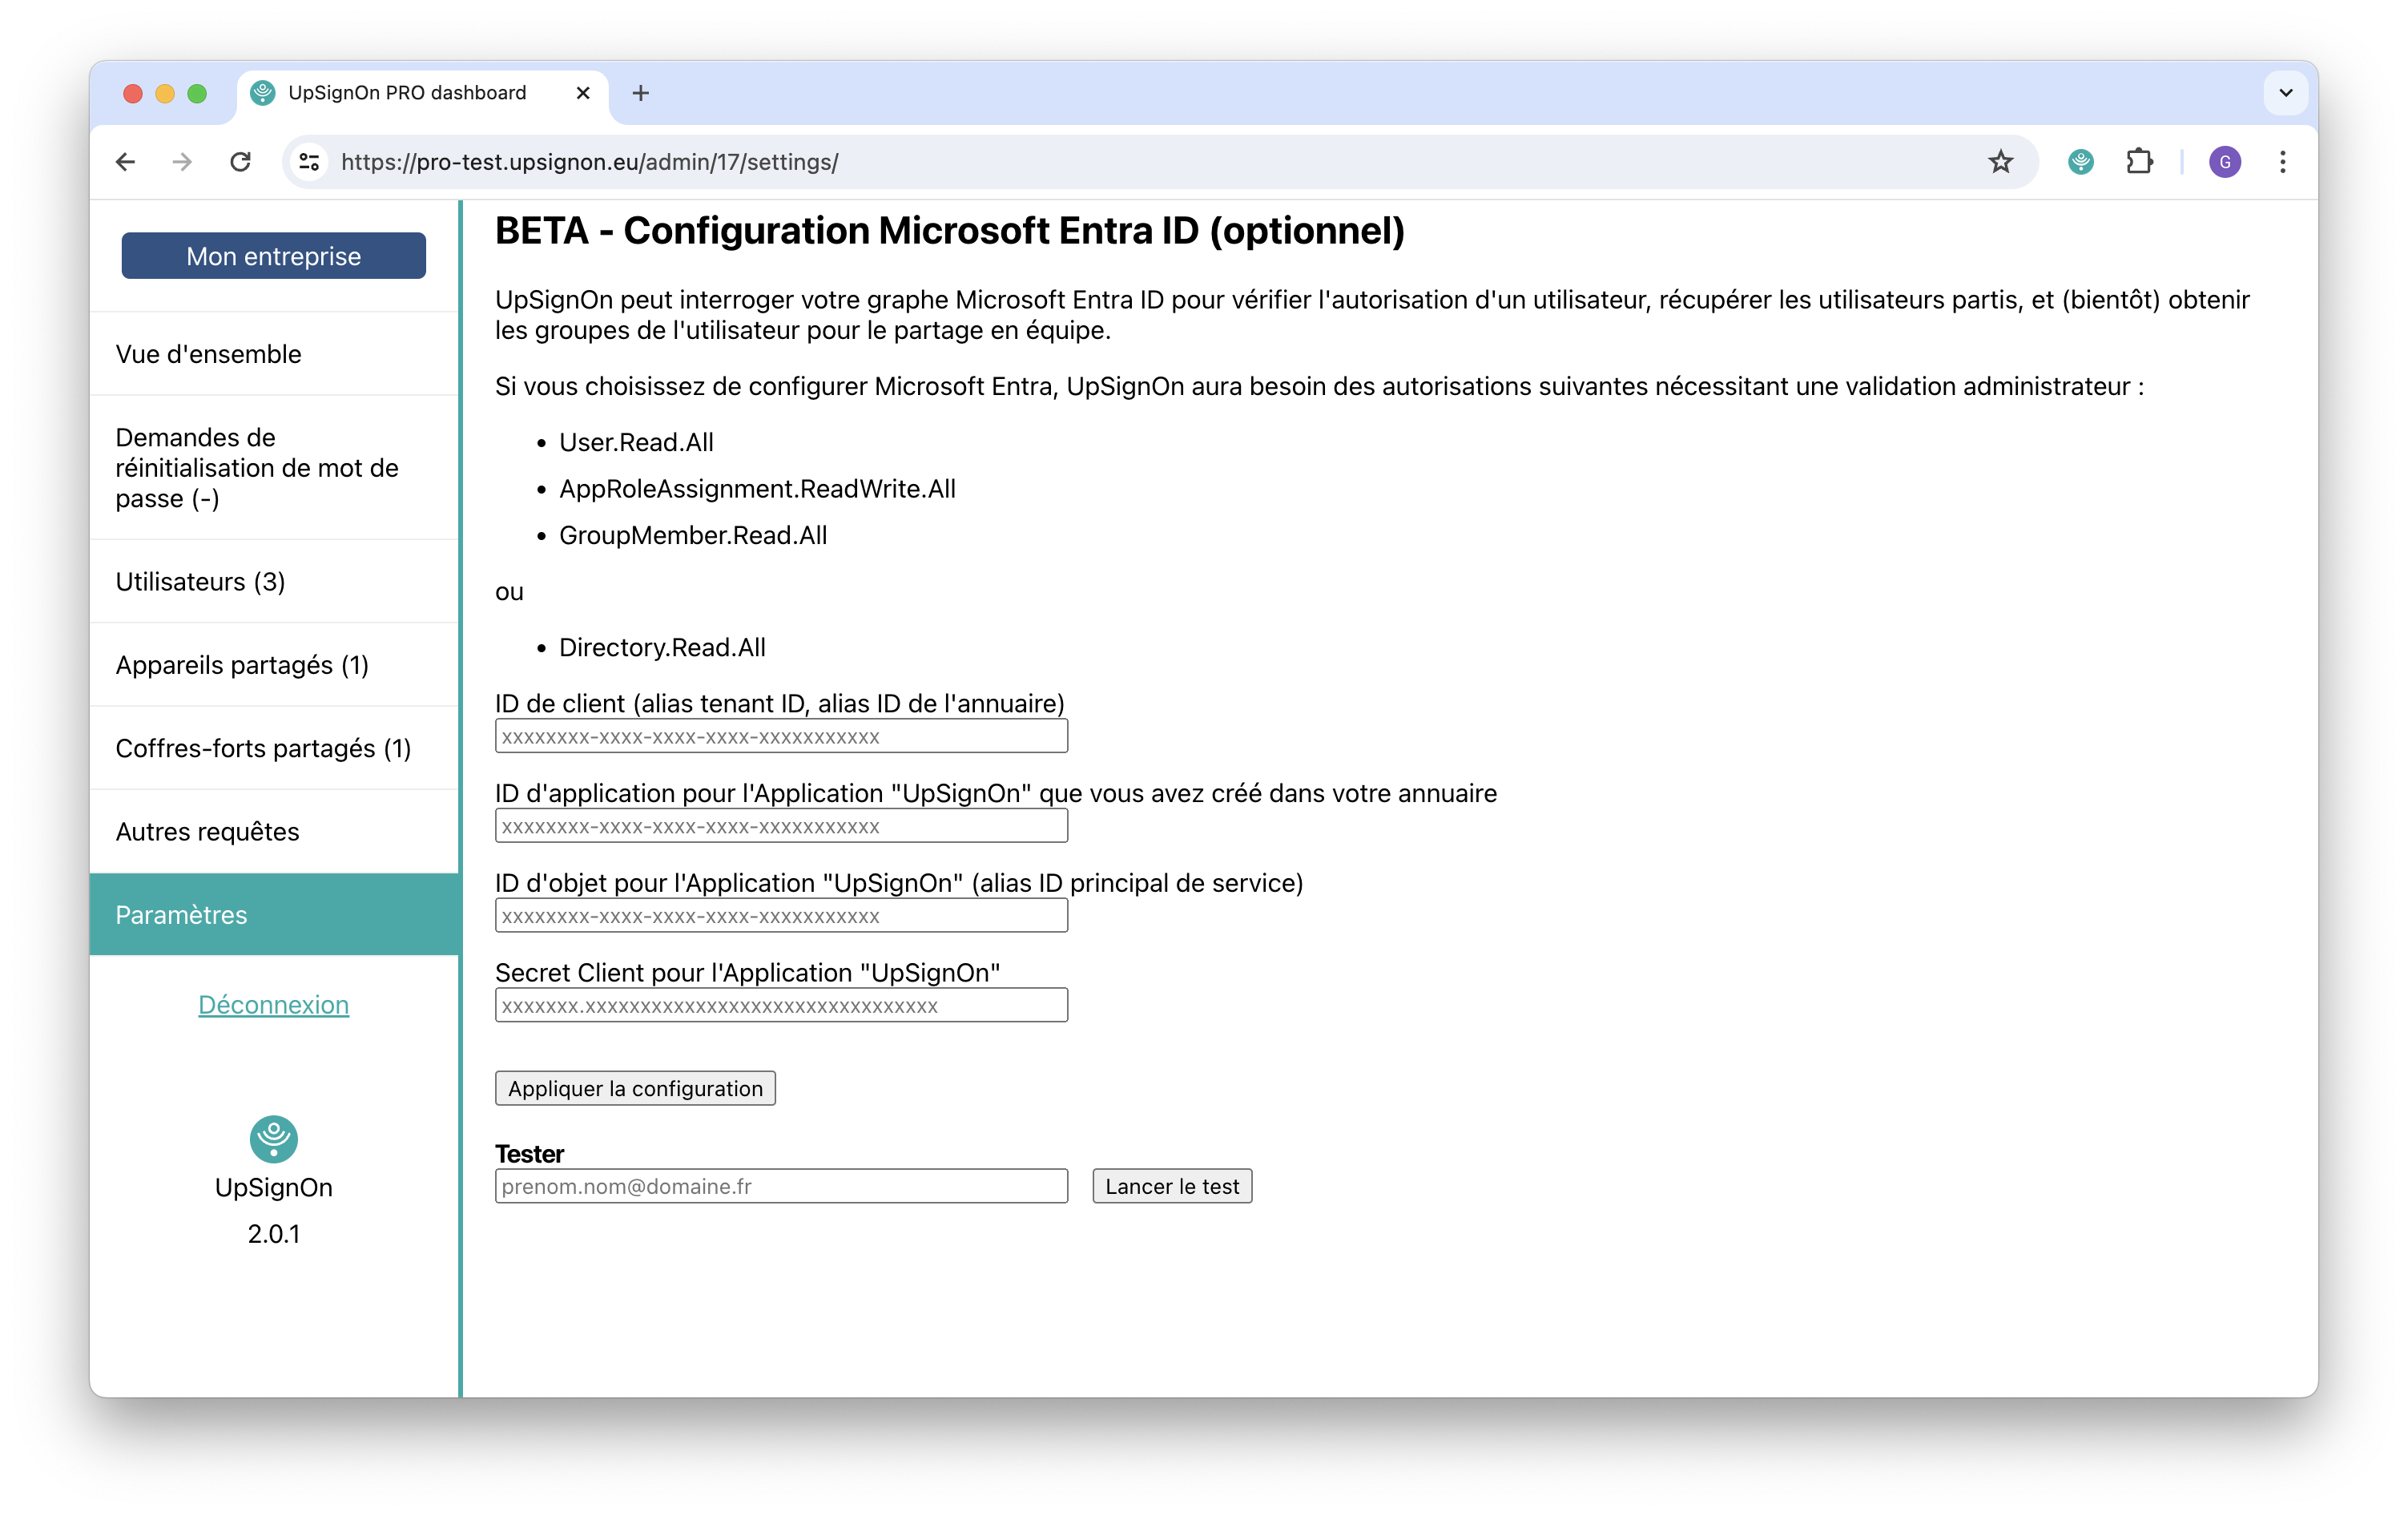 Screenshot of the Microsoft Entra configuration interface in the supervision console.